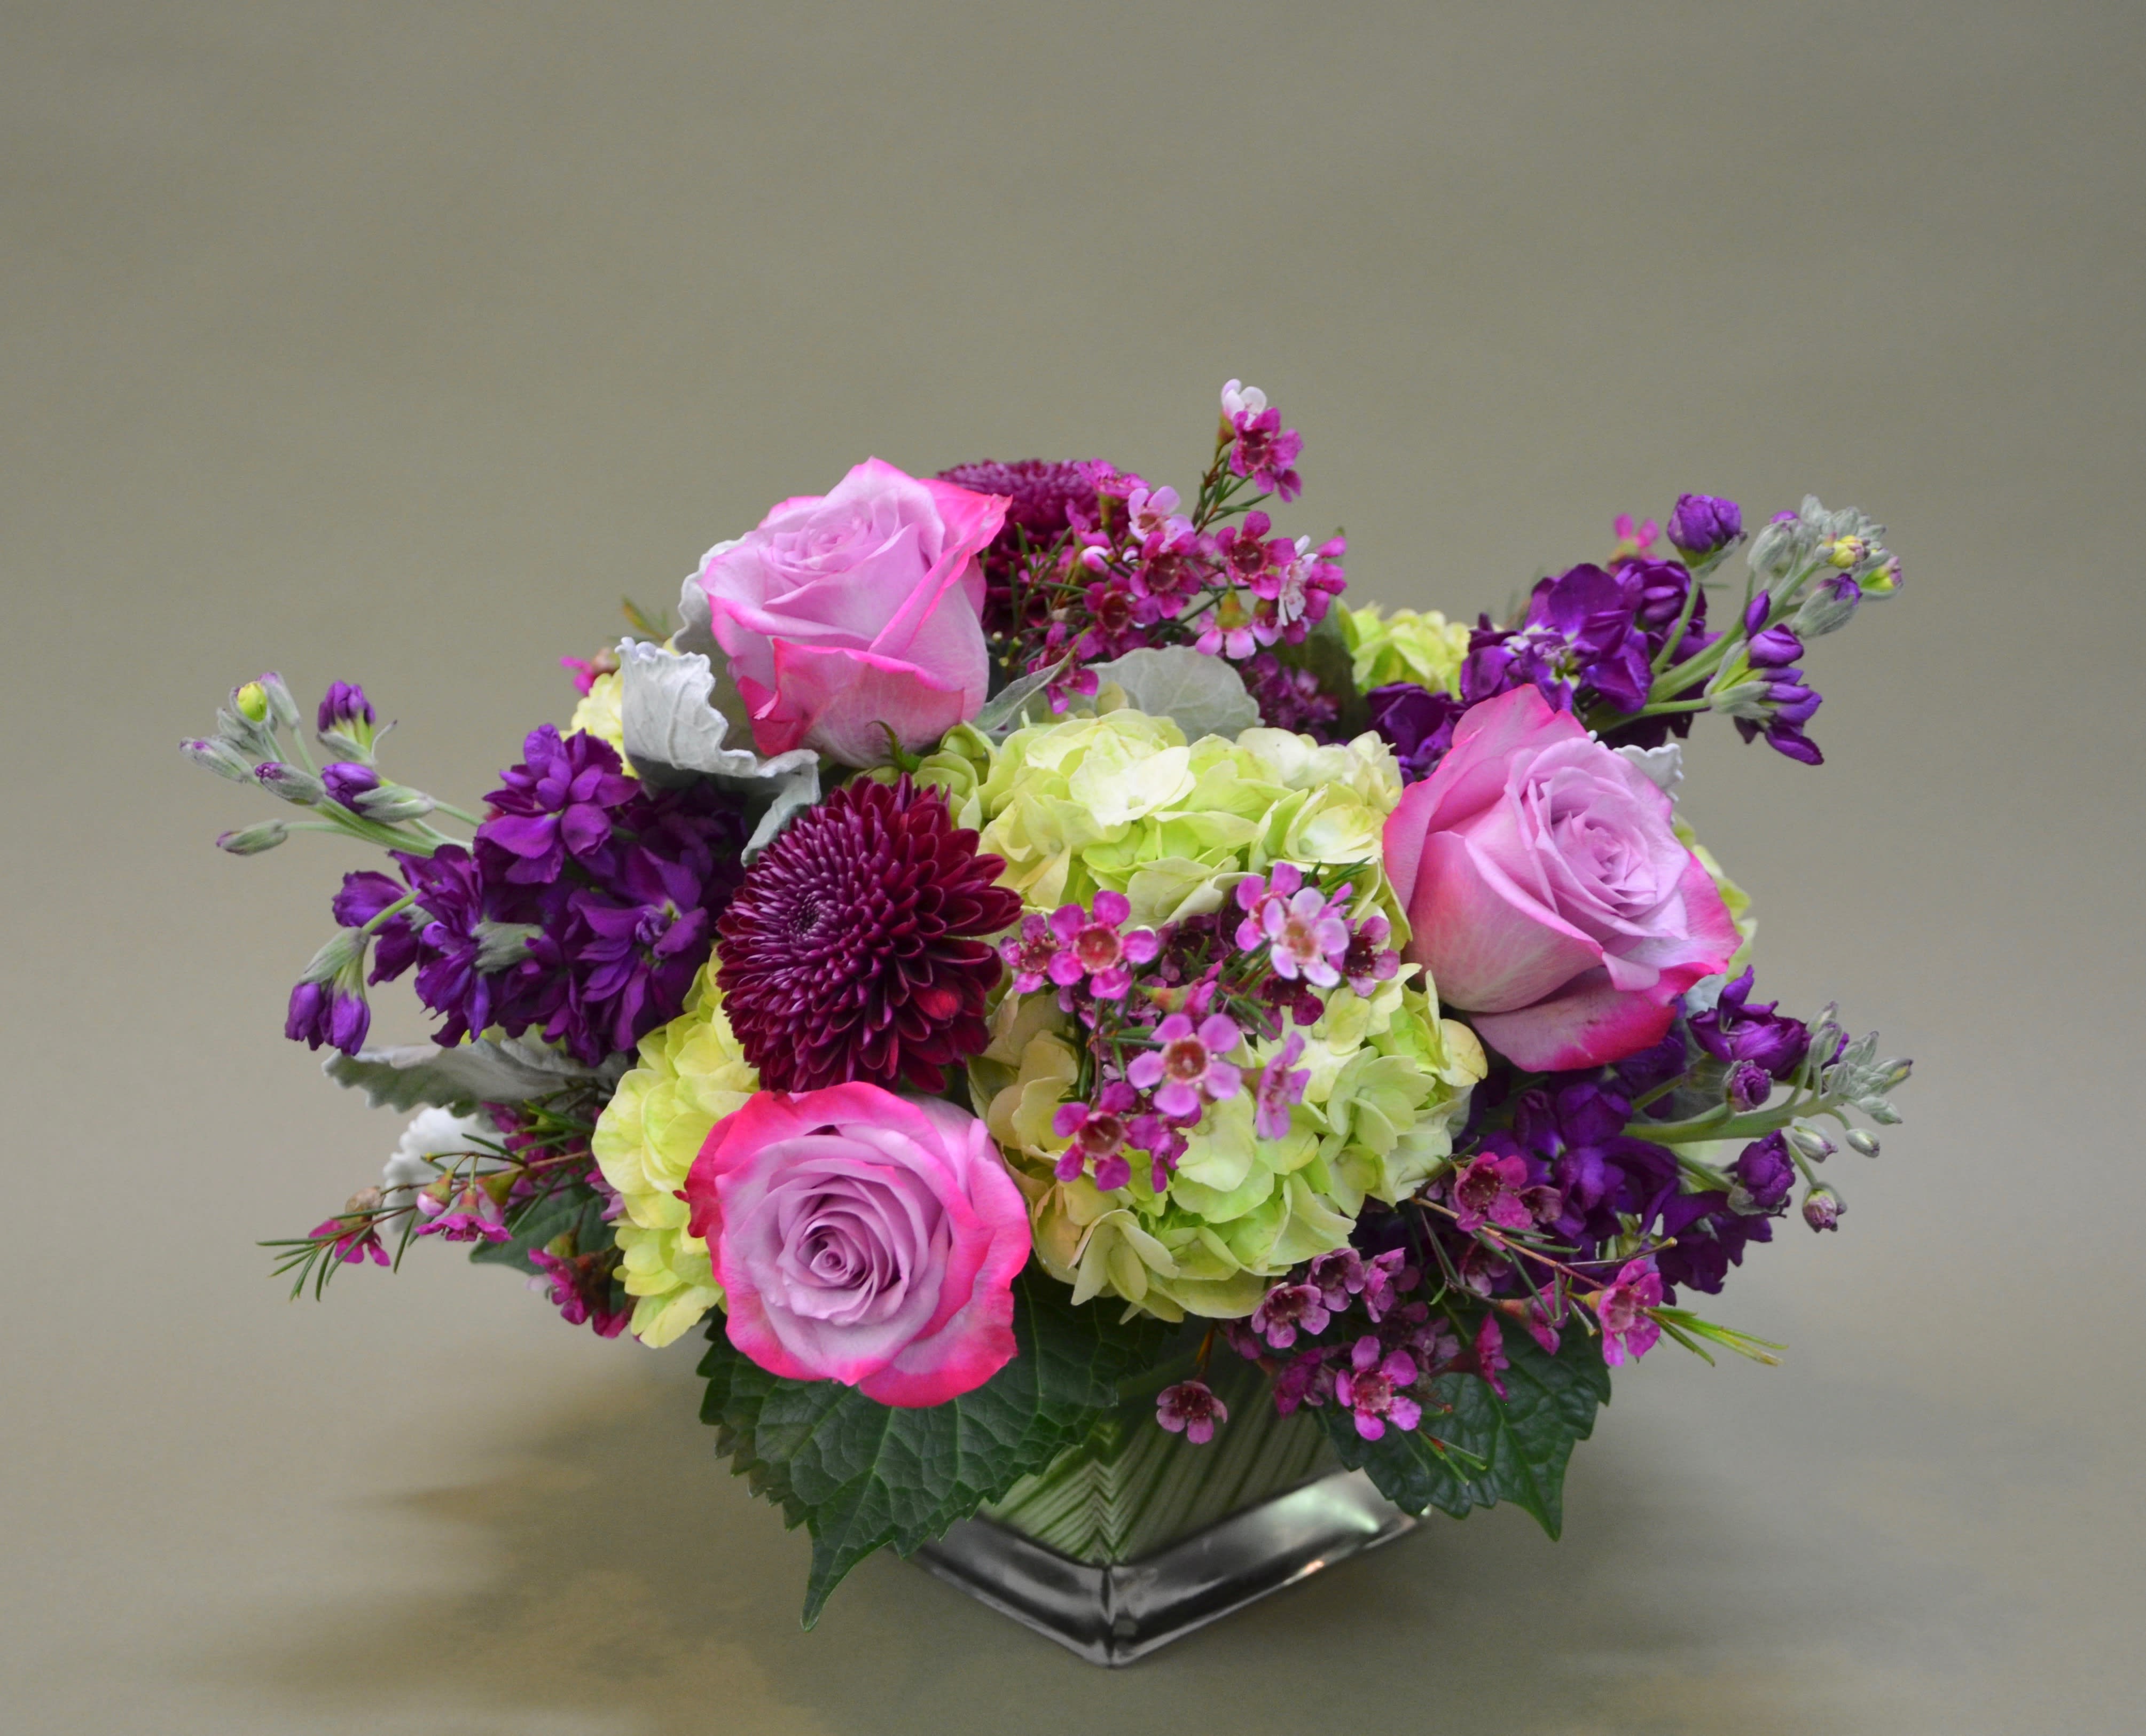 Purple Passion - A melody of garden flowers in lavenders and purples. 